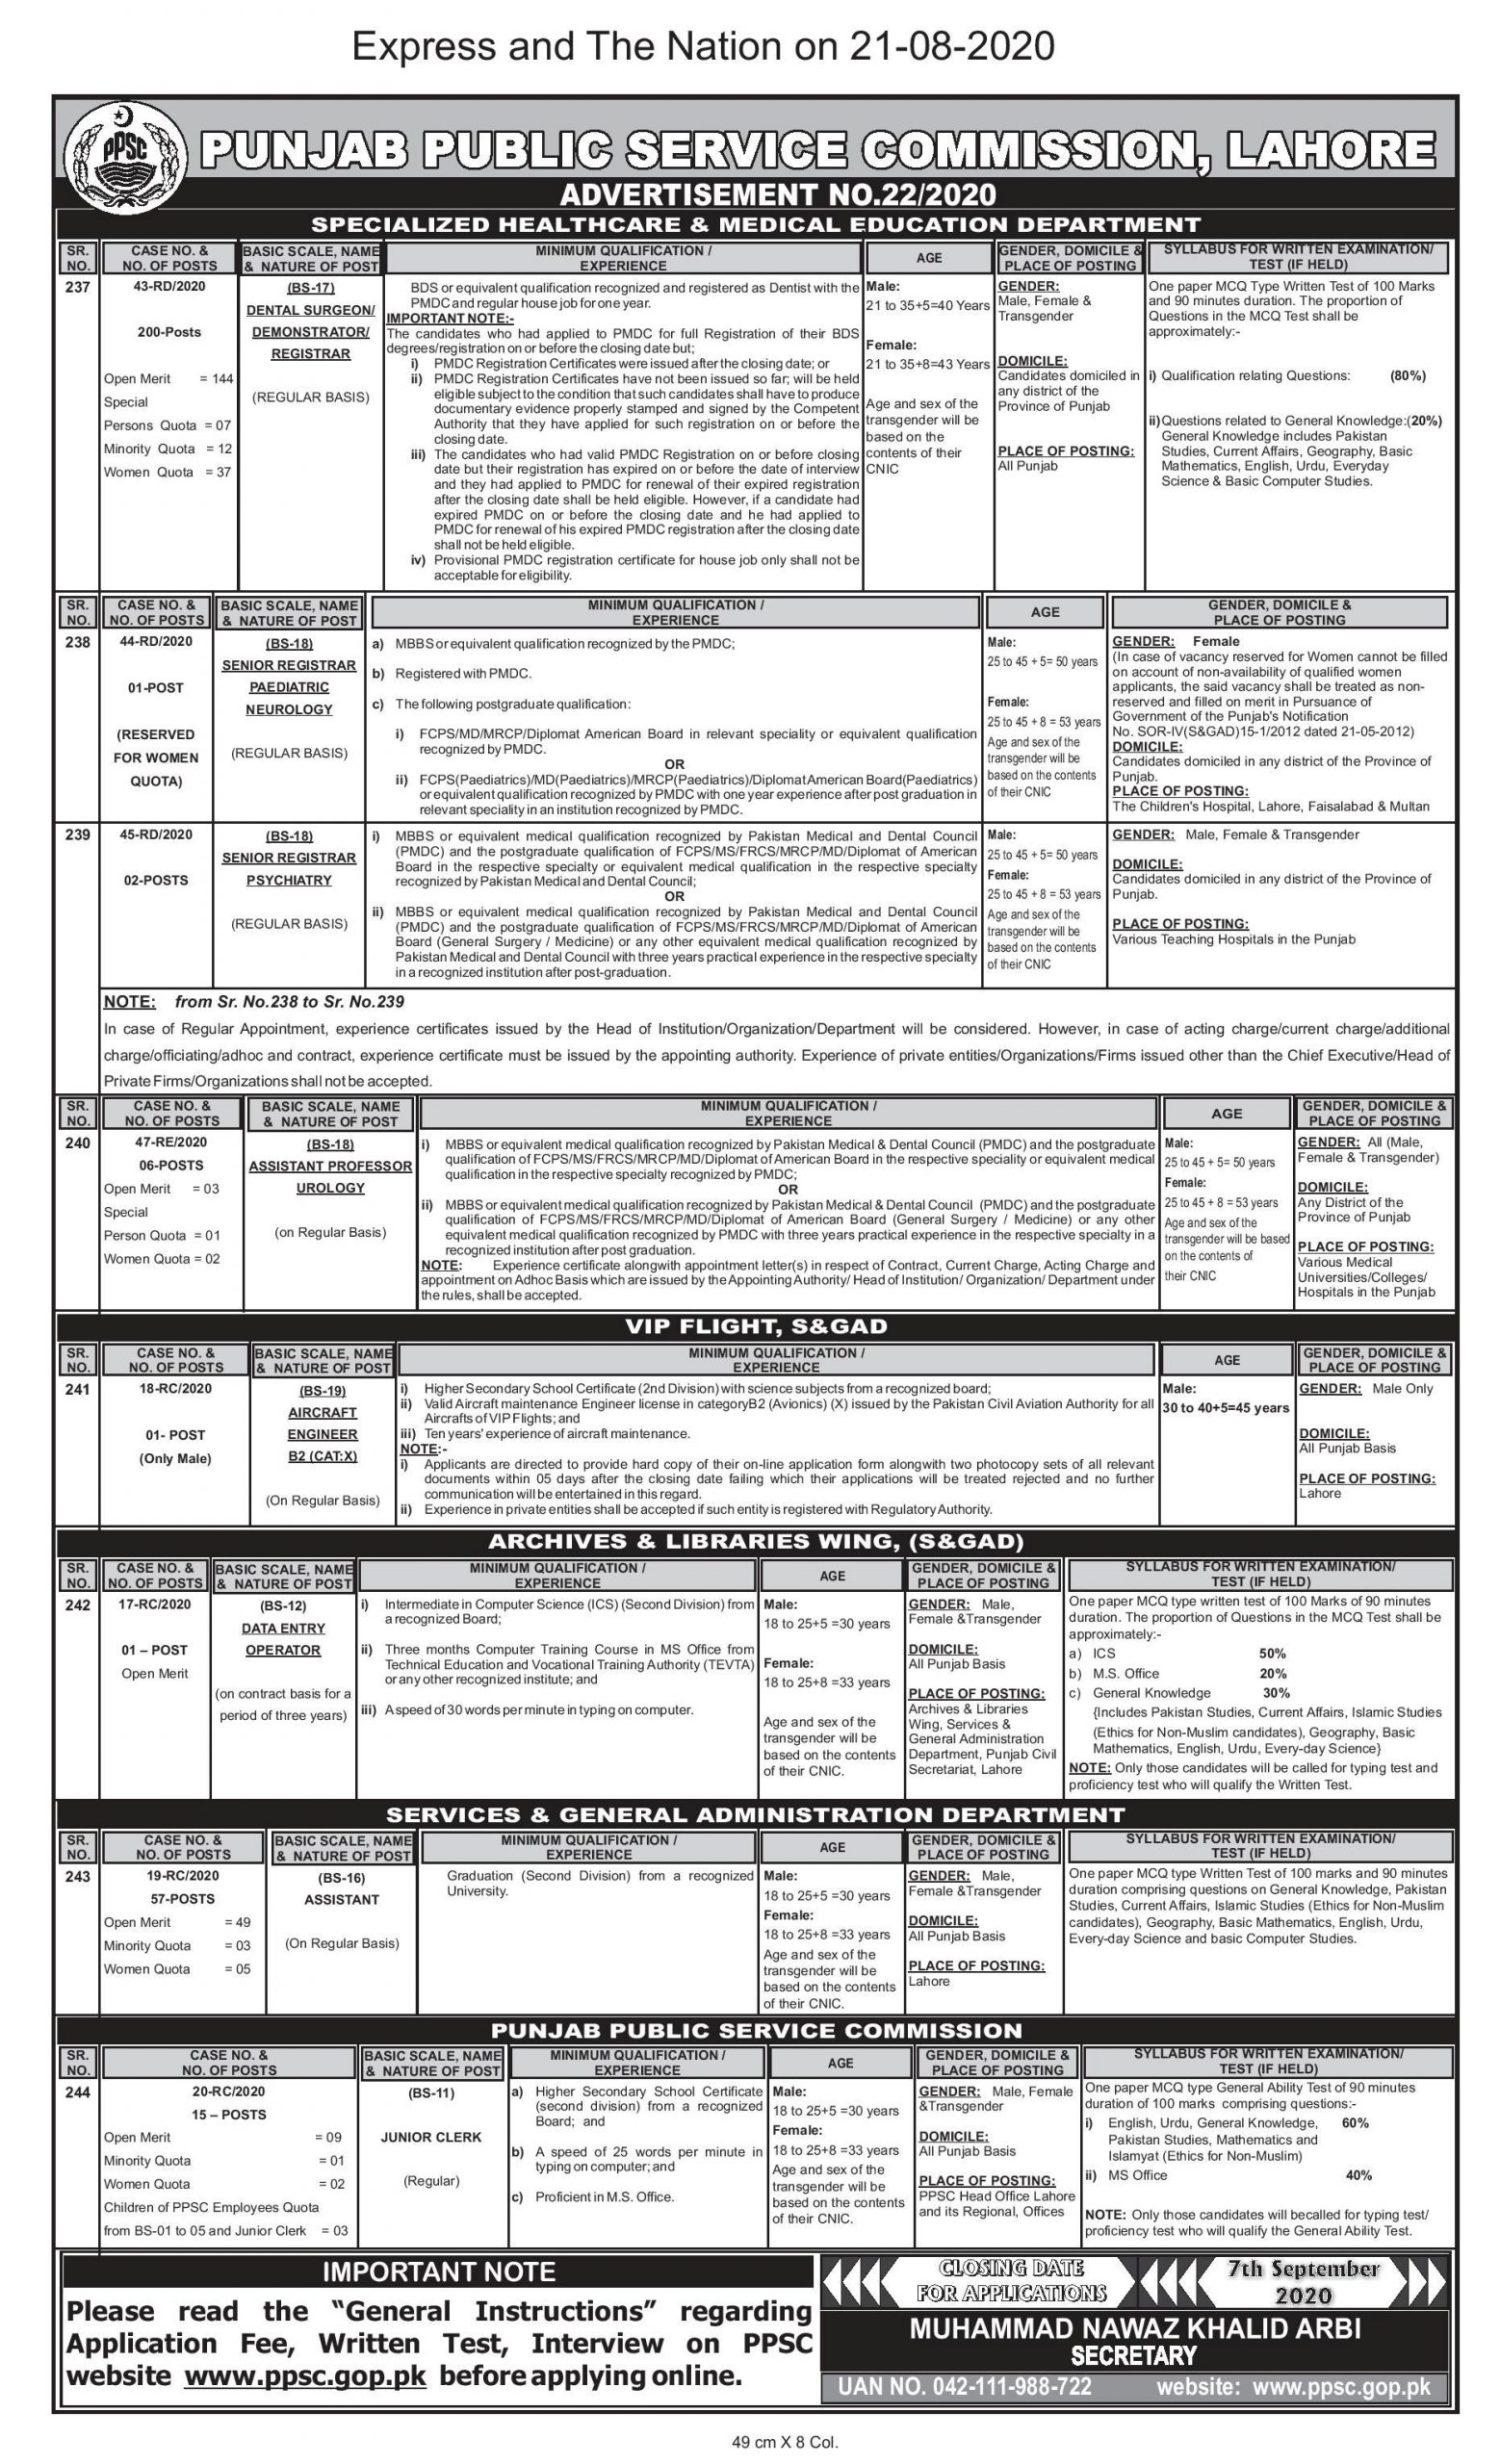 SPECIALIZED HEALTHCARE & MEDICAL EDUCATION DEPARTMENT JOBS